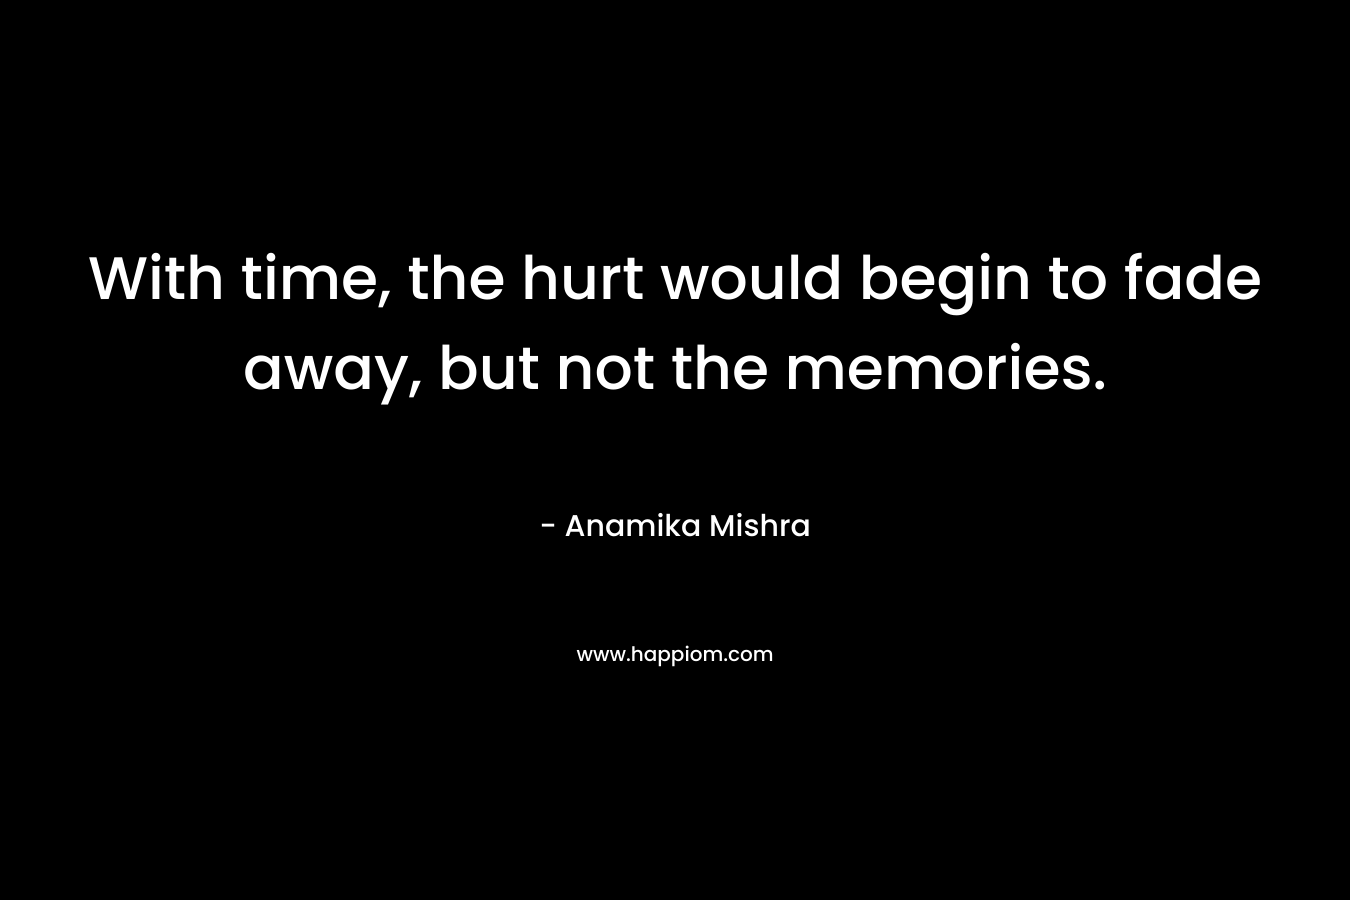 With time, the hurt would begin to fade away, but not the memories.